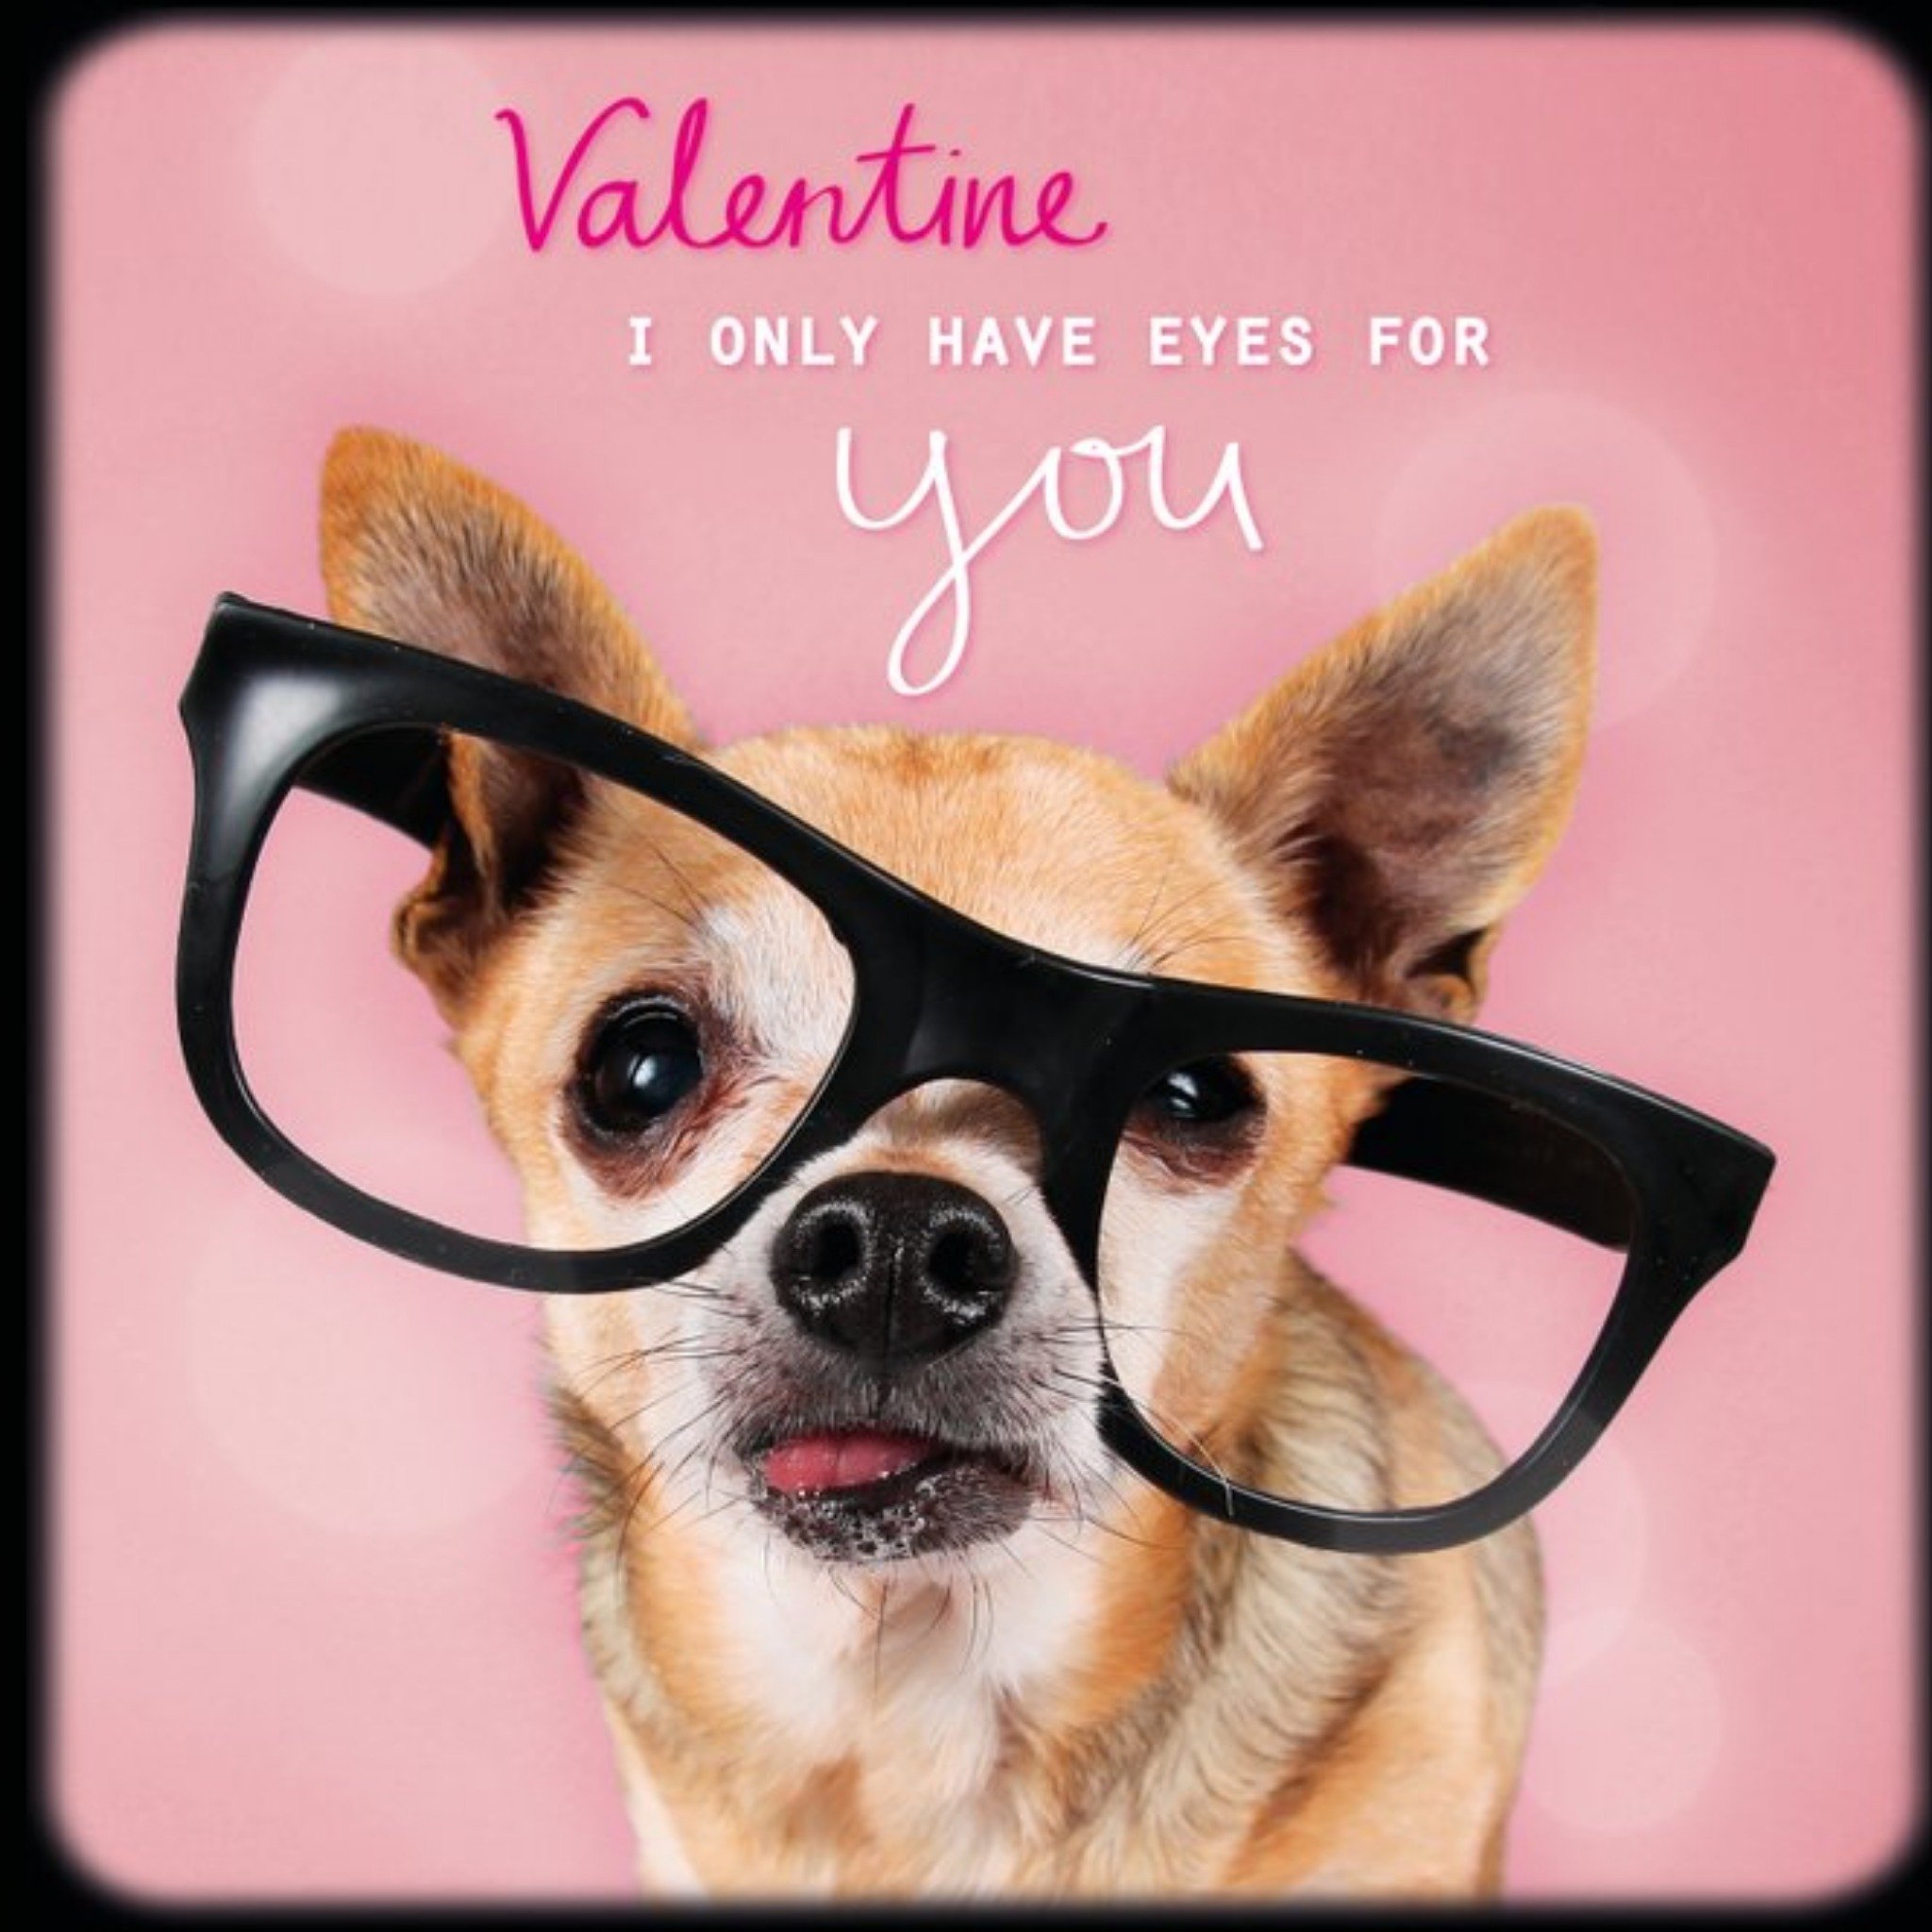 Moonpig Chihuahua With Glasses Personalised Happy Valentine's Day Card, Square